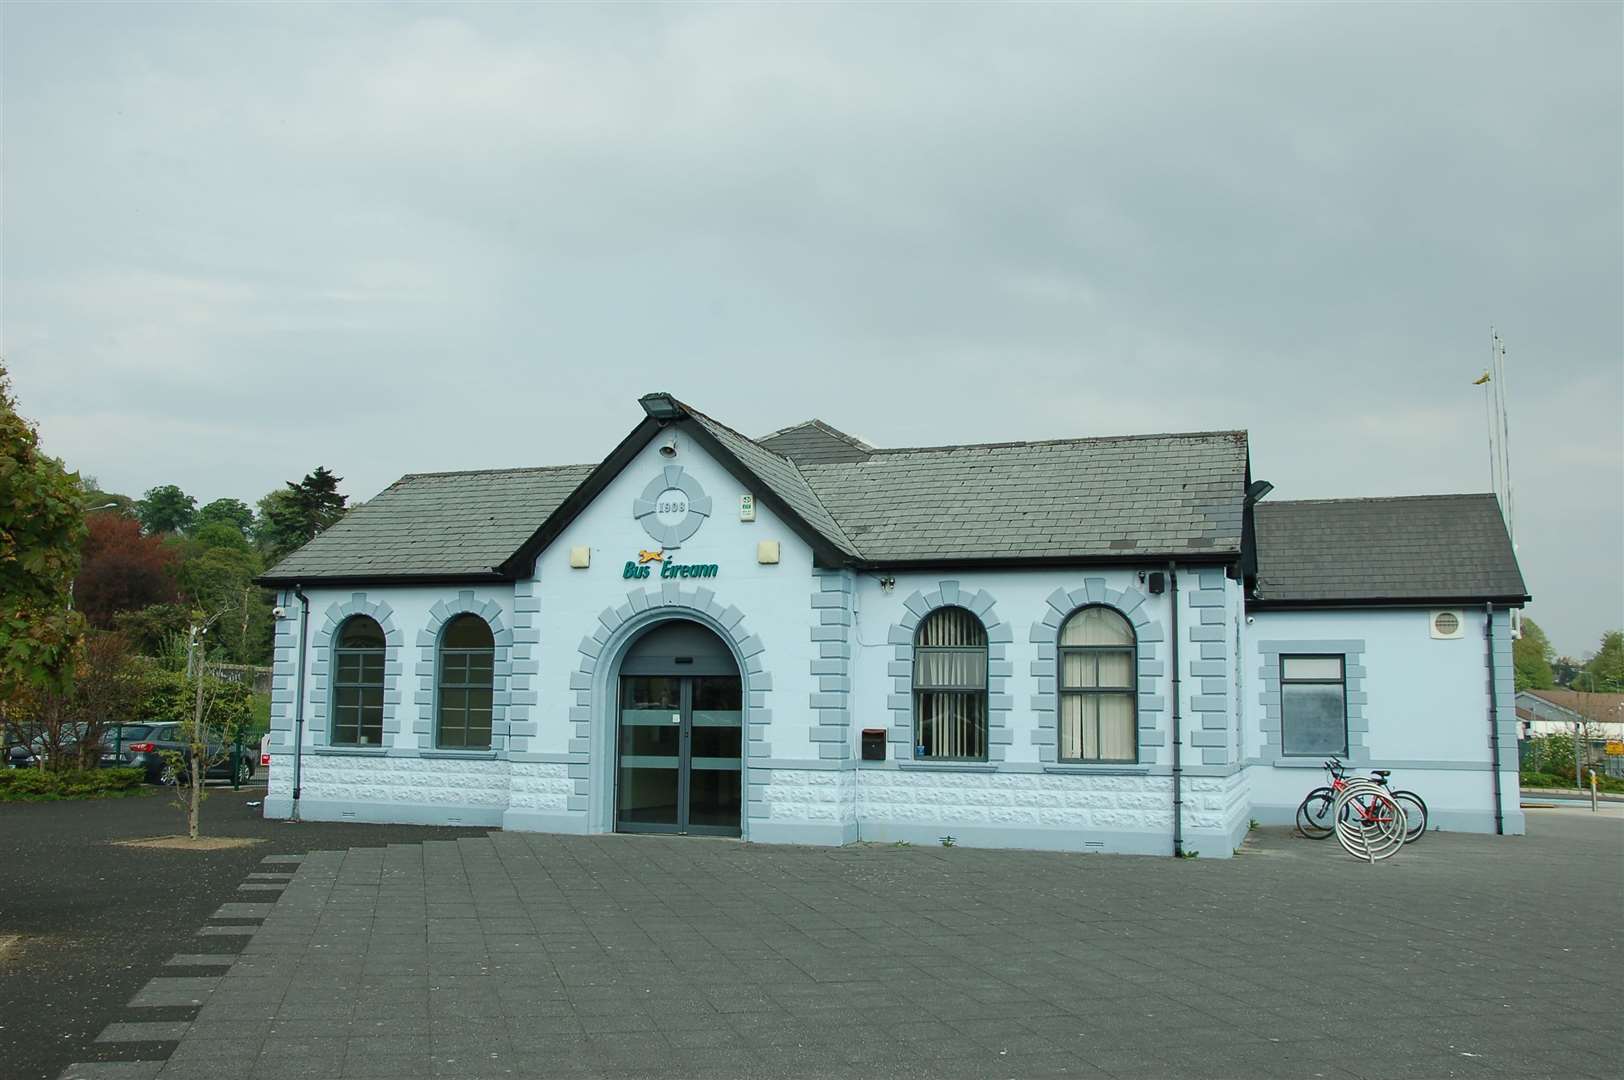 The old railway station in Letterkenny, now the busy bus station.